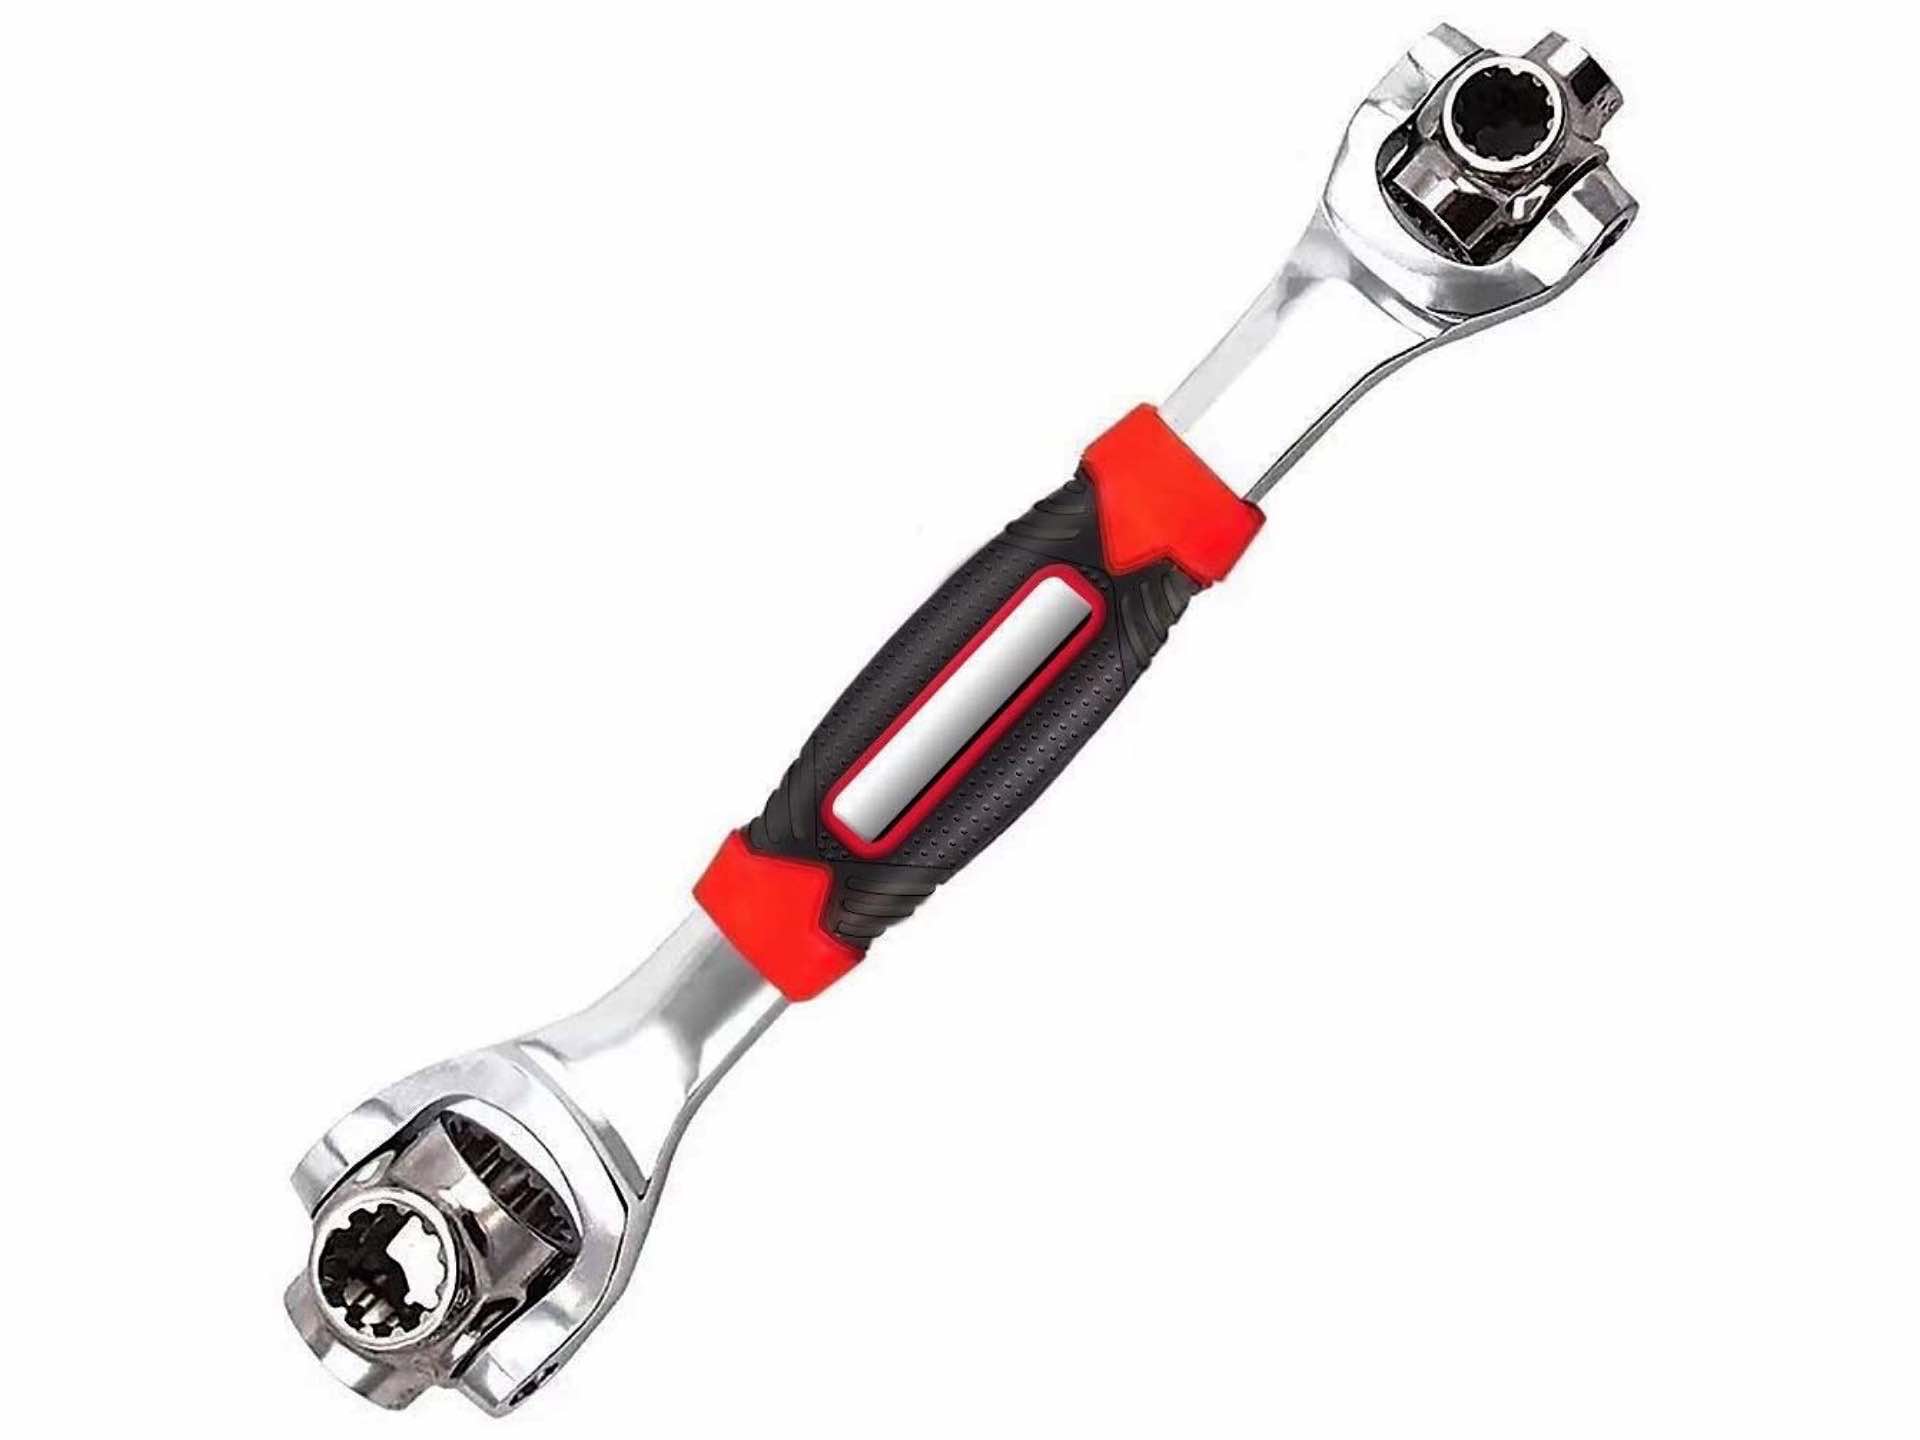 ipstyle-48-in-1-multifunction-socket-wrench